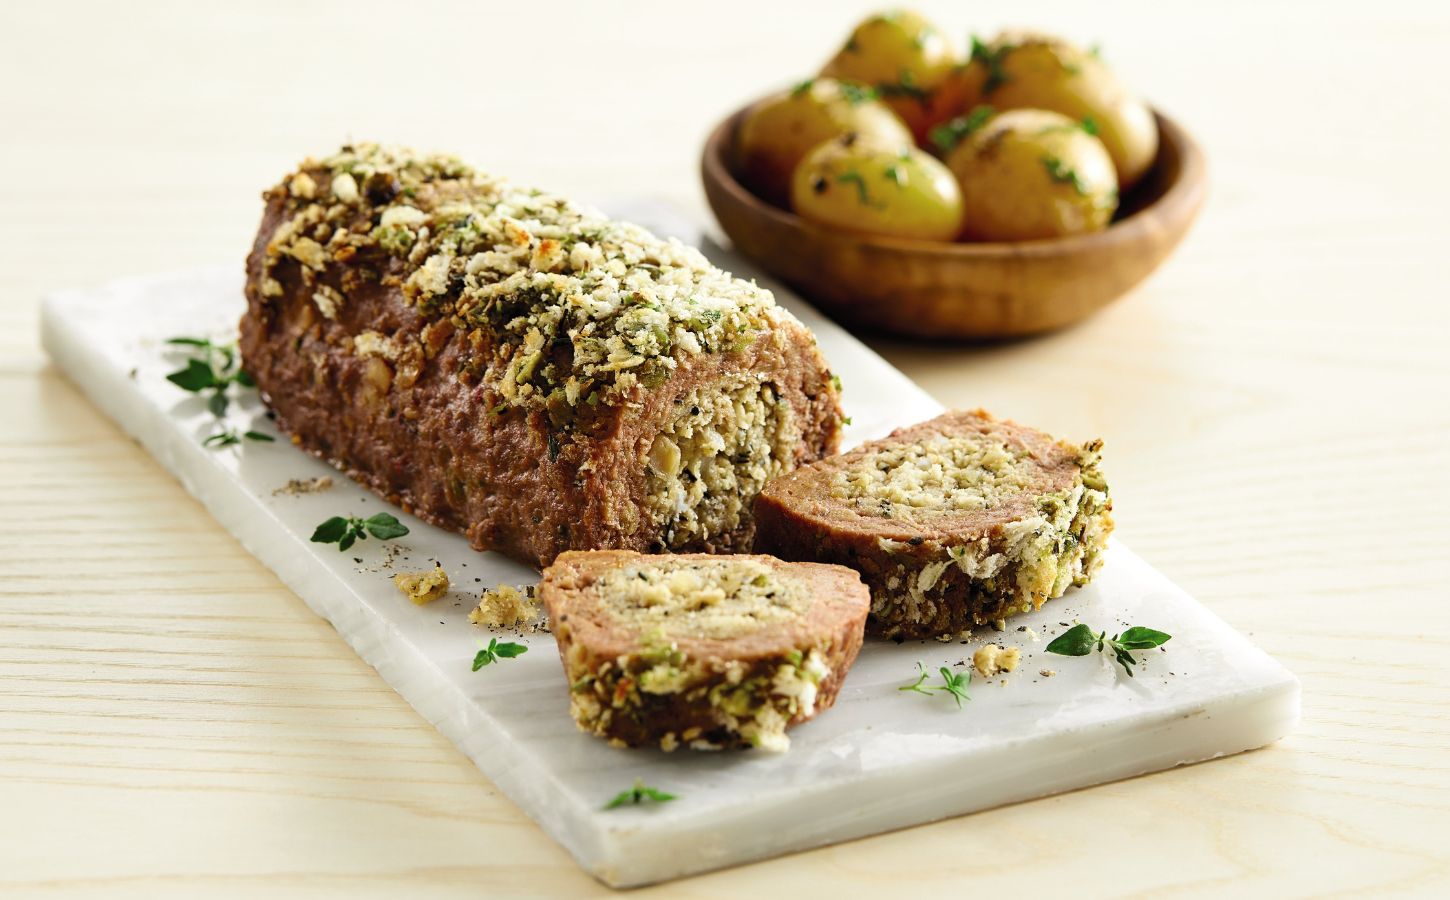 Aldi's vegan "No Lamb" roasting joint, which will soon be available to buy in the UK